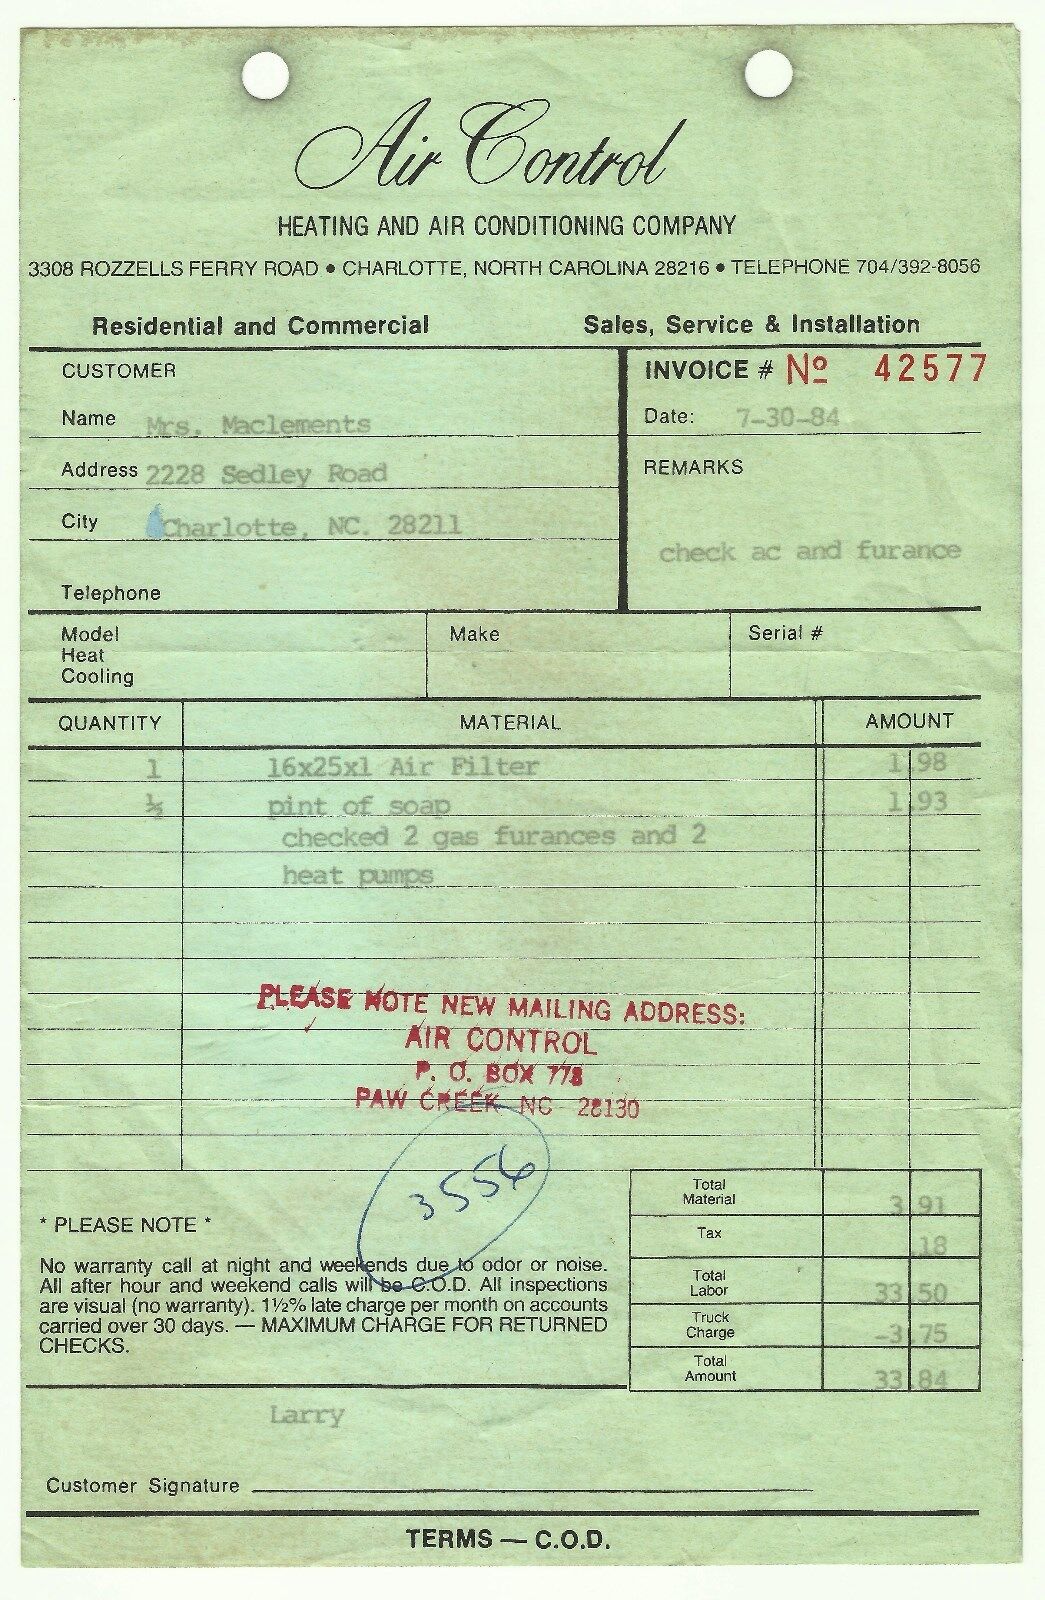 1984 invoice Air Control Heating & Air Conditioning ac business Charlotte NC